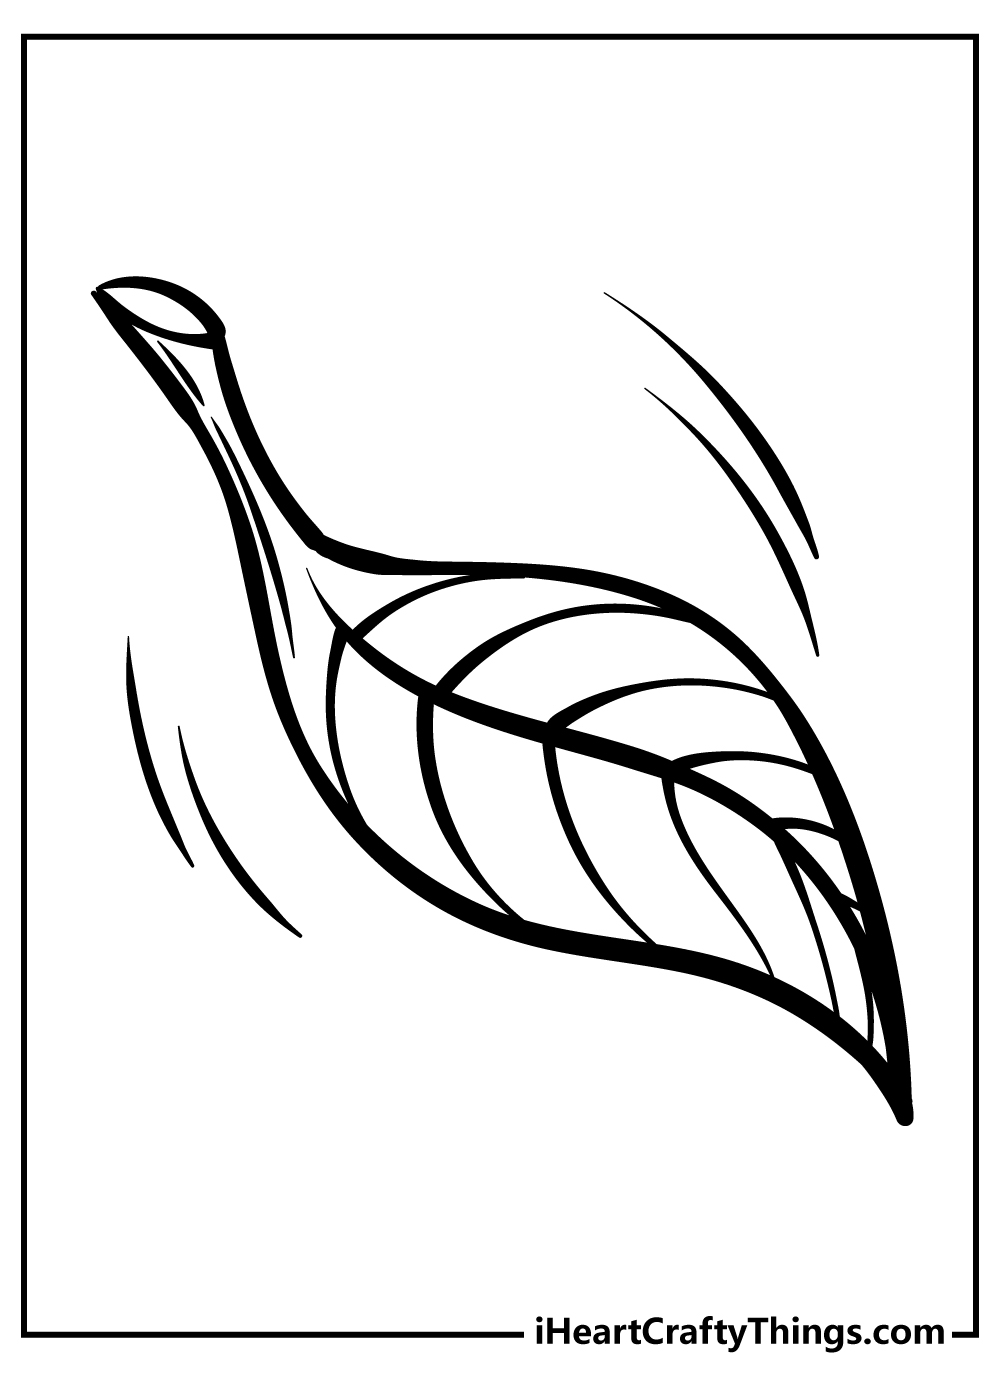 Leaf Coloring Pages for preschoolers free printable